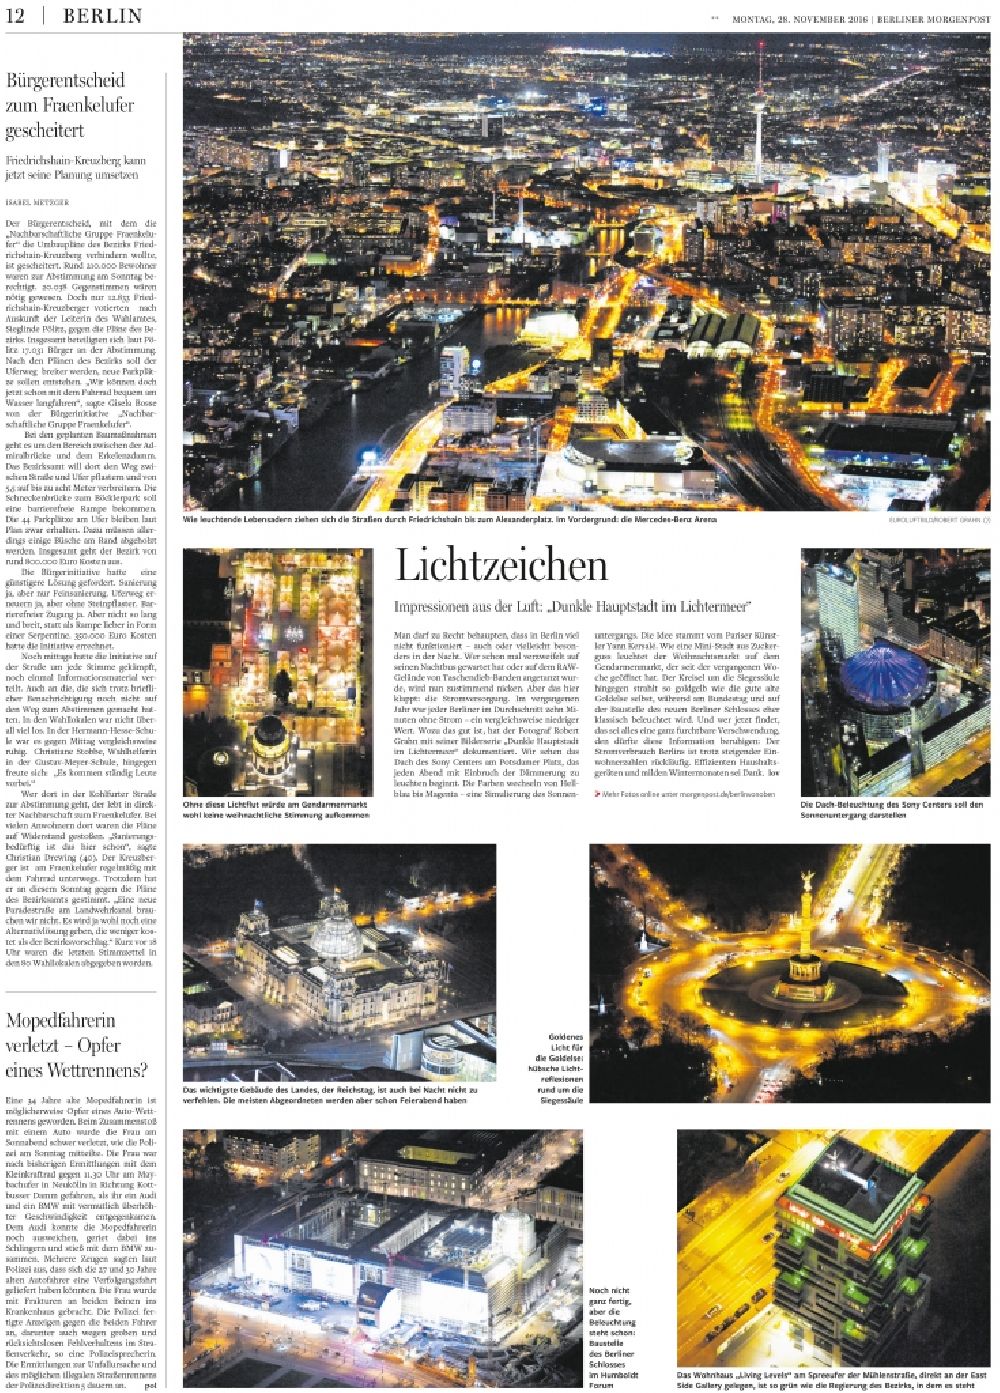 Aerial image at night Berlin - Picture Section / media use of aerial use in the Newspaper - daily paper BERLINER MORGENPOST Interior Double facade page 12 - 11 with night air images from the city center, added to in Berlin